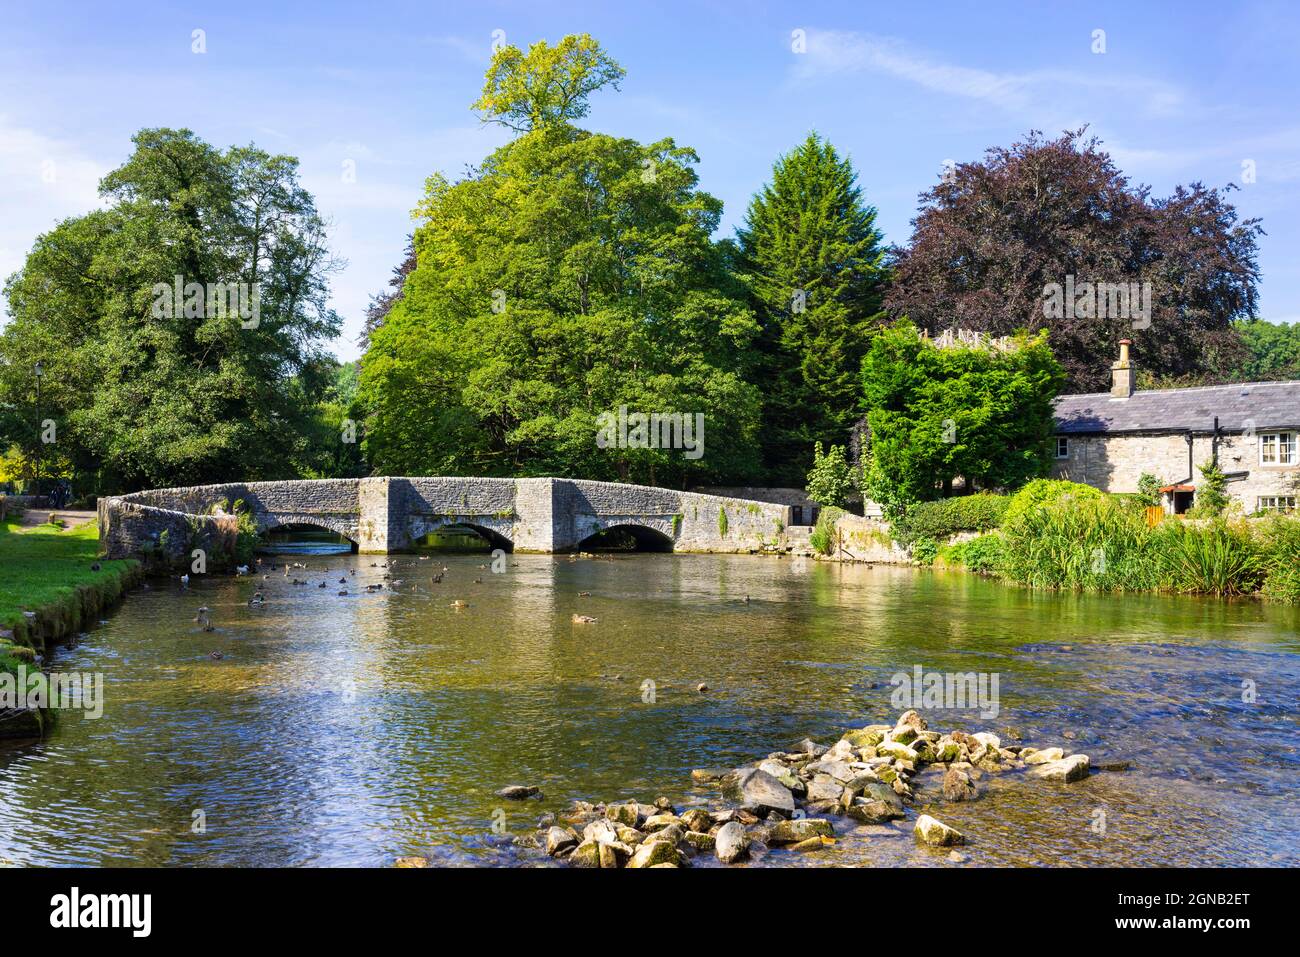 Medieval Sheepwash Bridge over the River Wye in the Village of Ashford in the Water, White Peak, Derbyshire  England UK GB Europe Stock Photo